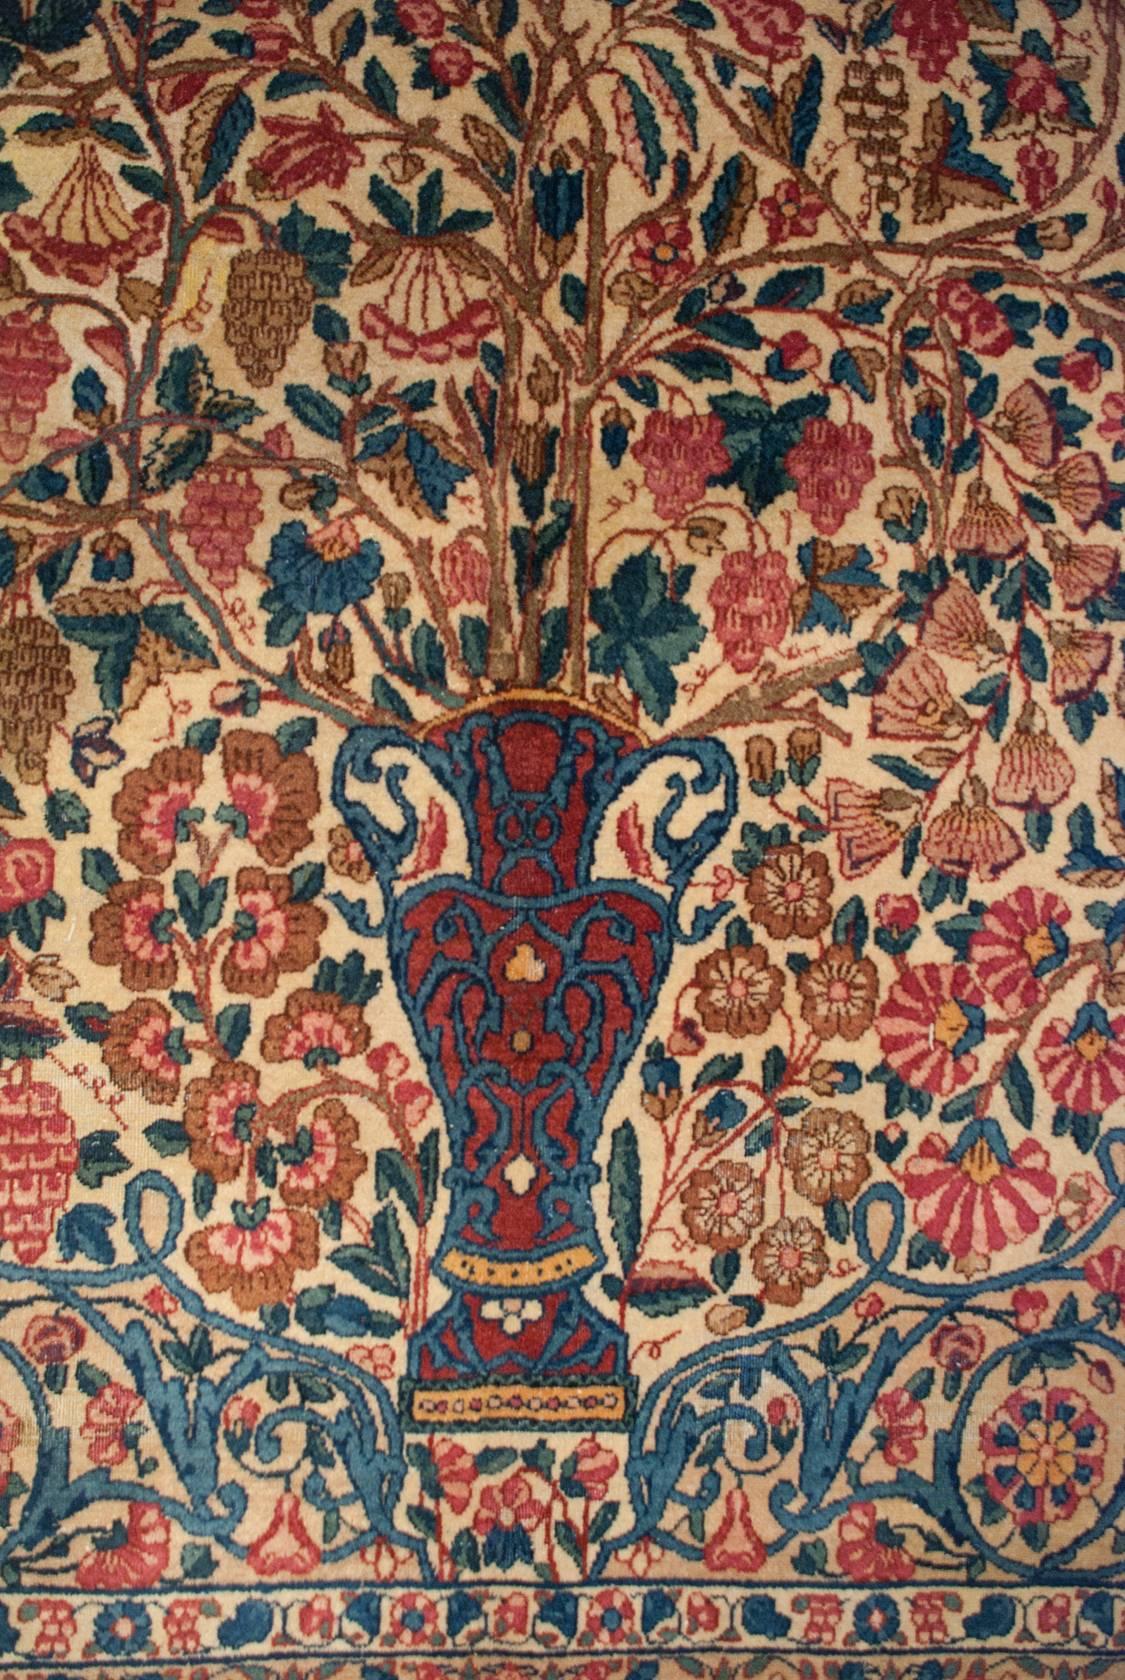 An unbelievable early 20th century Persian Kirman rug with the most amazing tree-of-life pattern sprouting from a crimson and indigo double-handled vase. The branches are heavy with myriad varieties of flowers, grapes, and petite pomegranate